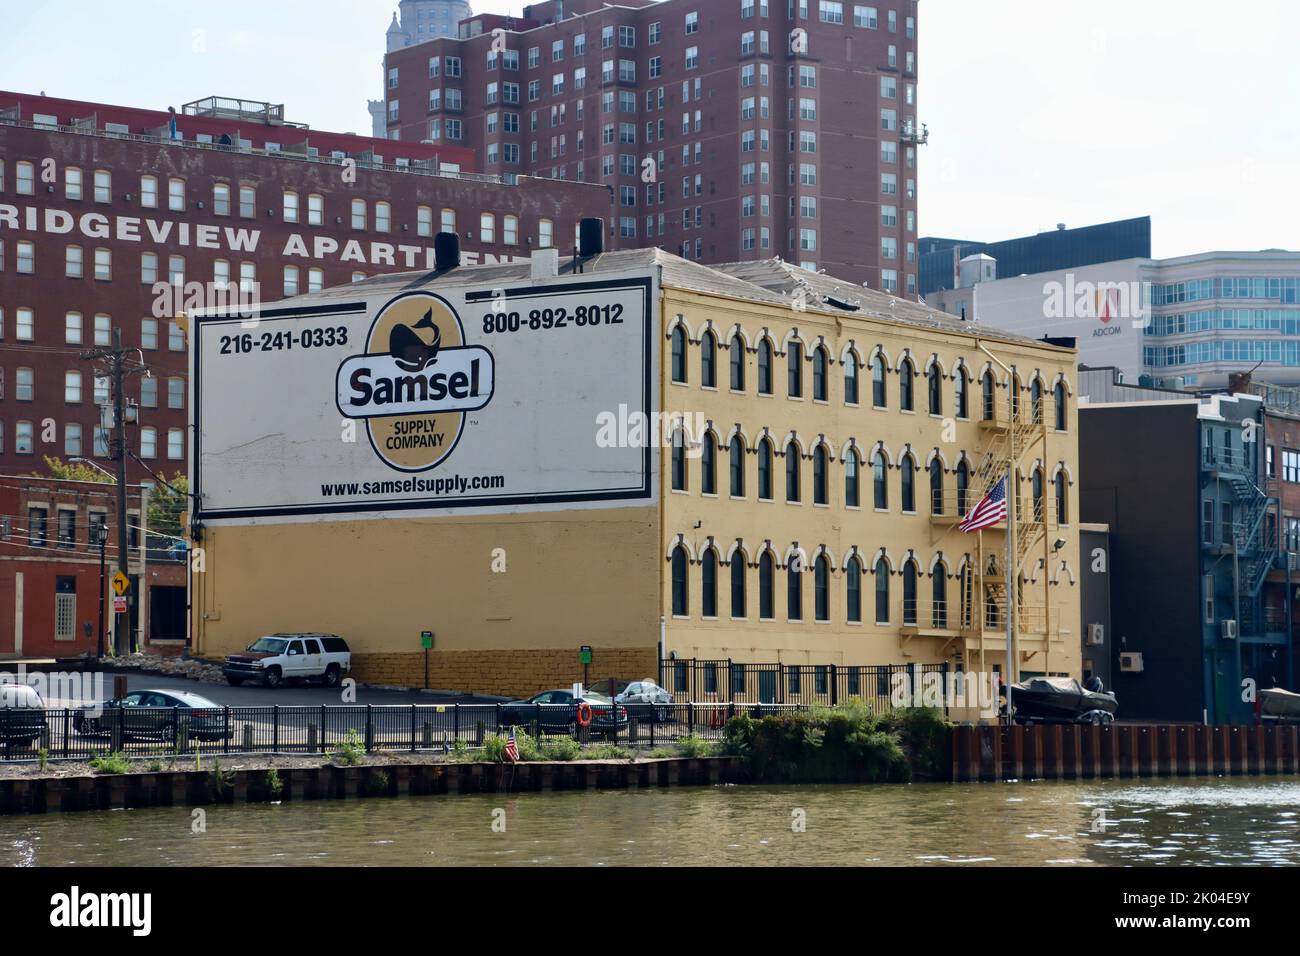 The Samsel Supply Company buildings by Cuyahoga river in the Flats area of Cleveland, Ohio Stock Photo